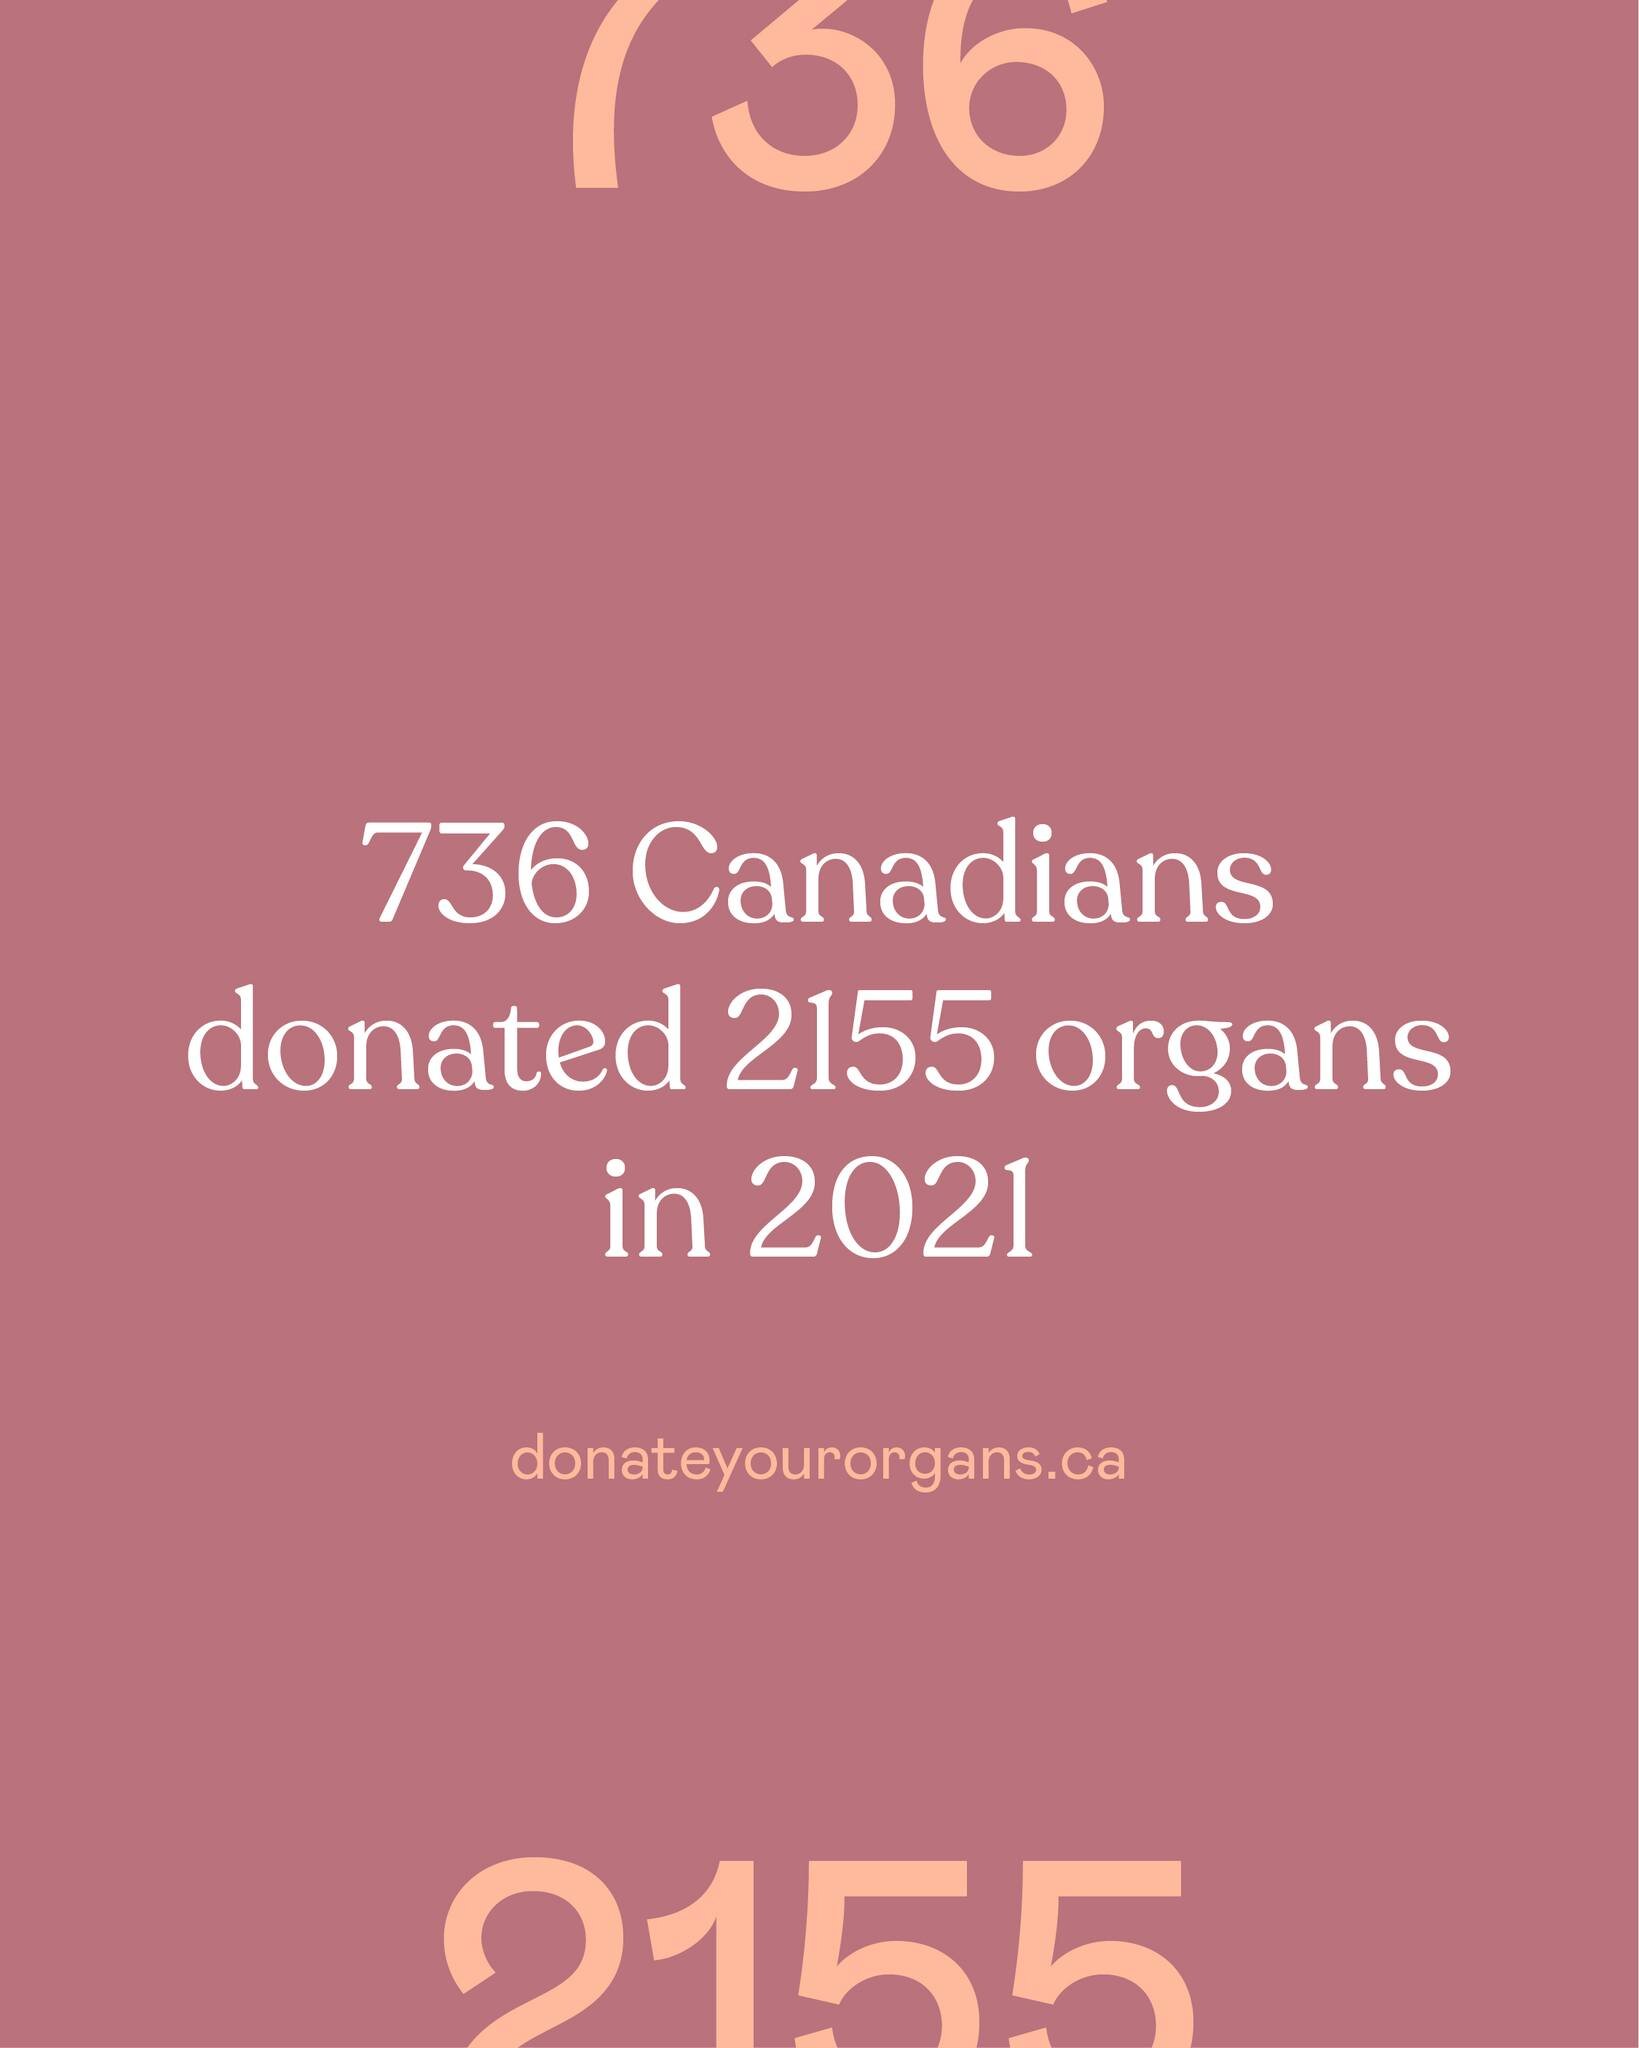 At the end of their lives, 736 Canadians donated 2155 organs in 2021. That&rsquo;s 2155 lives saved and/or improved. It&rsquo;s humanity at its finest.

Choose to leave well so others can live well.

donateyourorgans.ca 

Source: Canadian Organ Repla